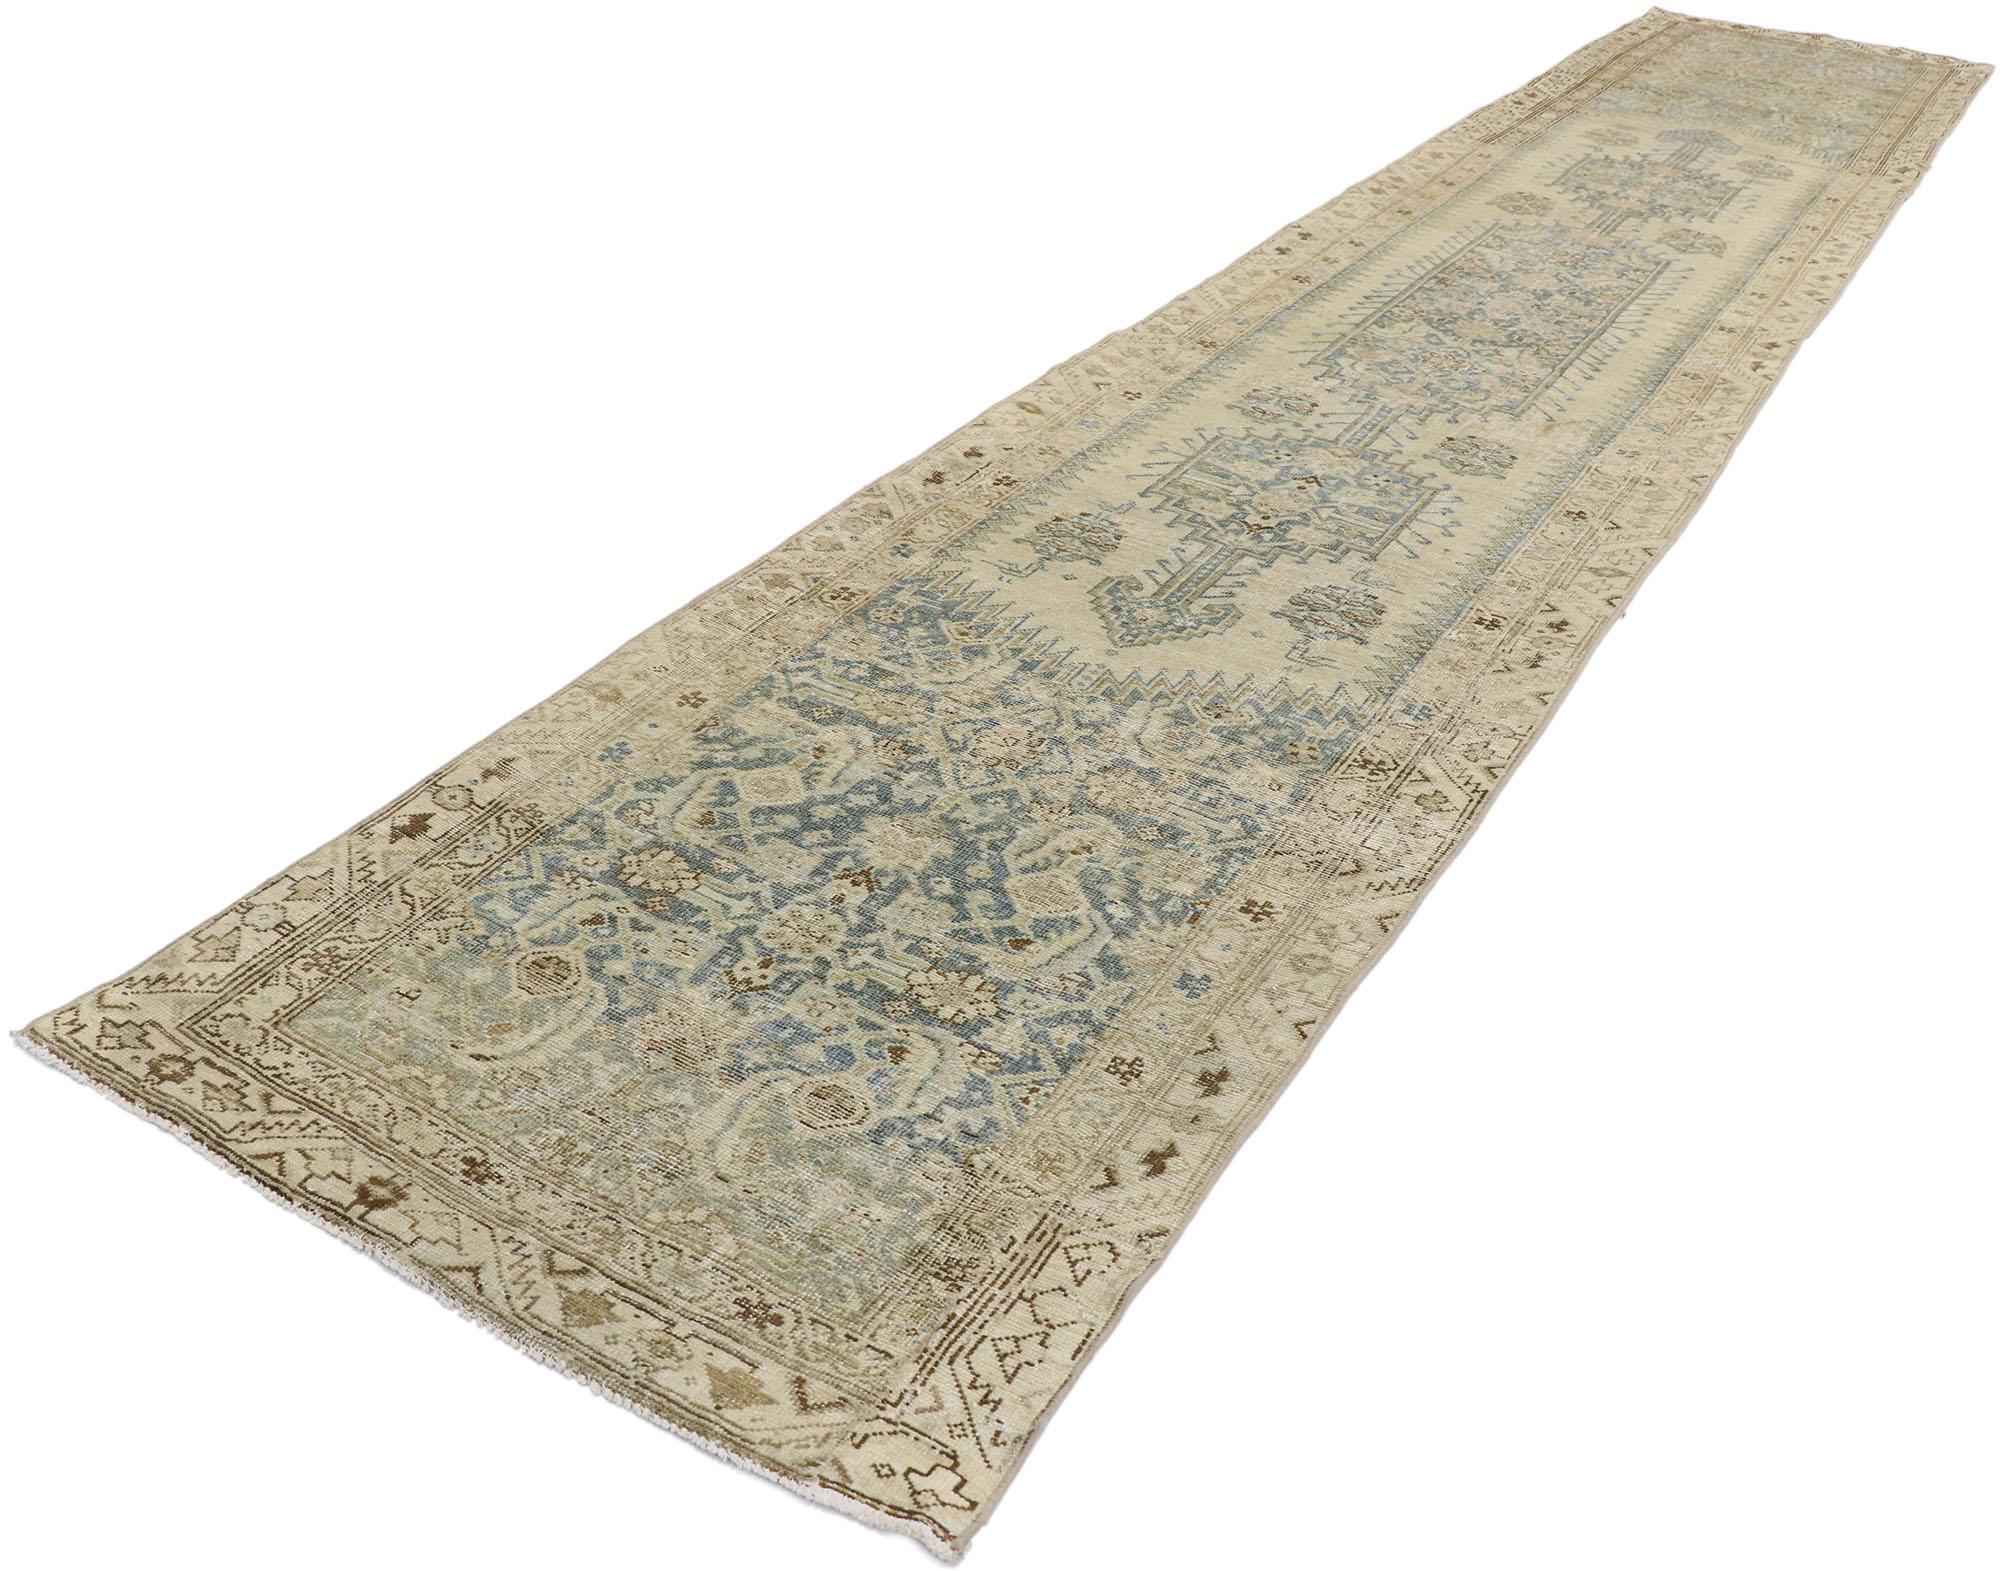 53240, distressed antique Persian Malayer Runner with French Provincial style and coastal colors. This hand knotted wool antique-washed antique Persian Malayer runner features a latch-hooked hexagonal medallion with palmette pendants floating on an